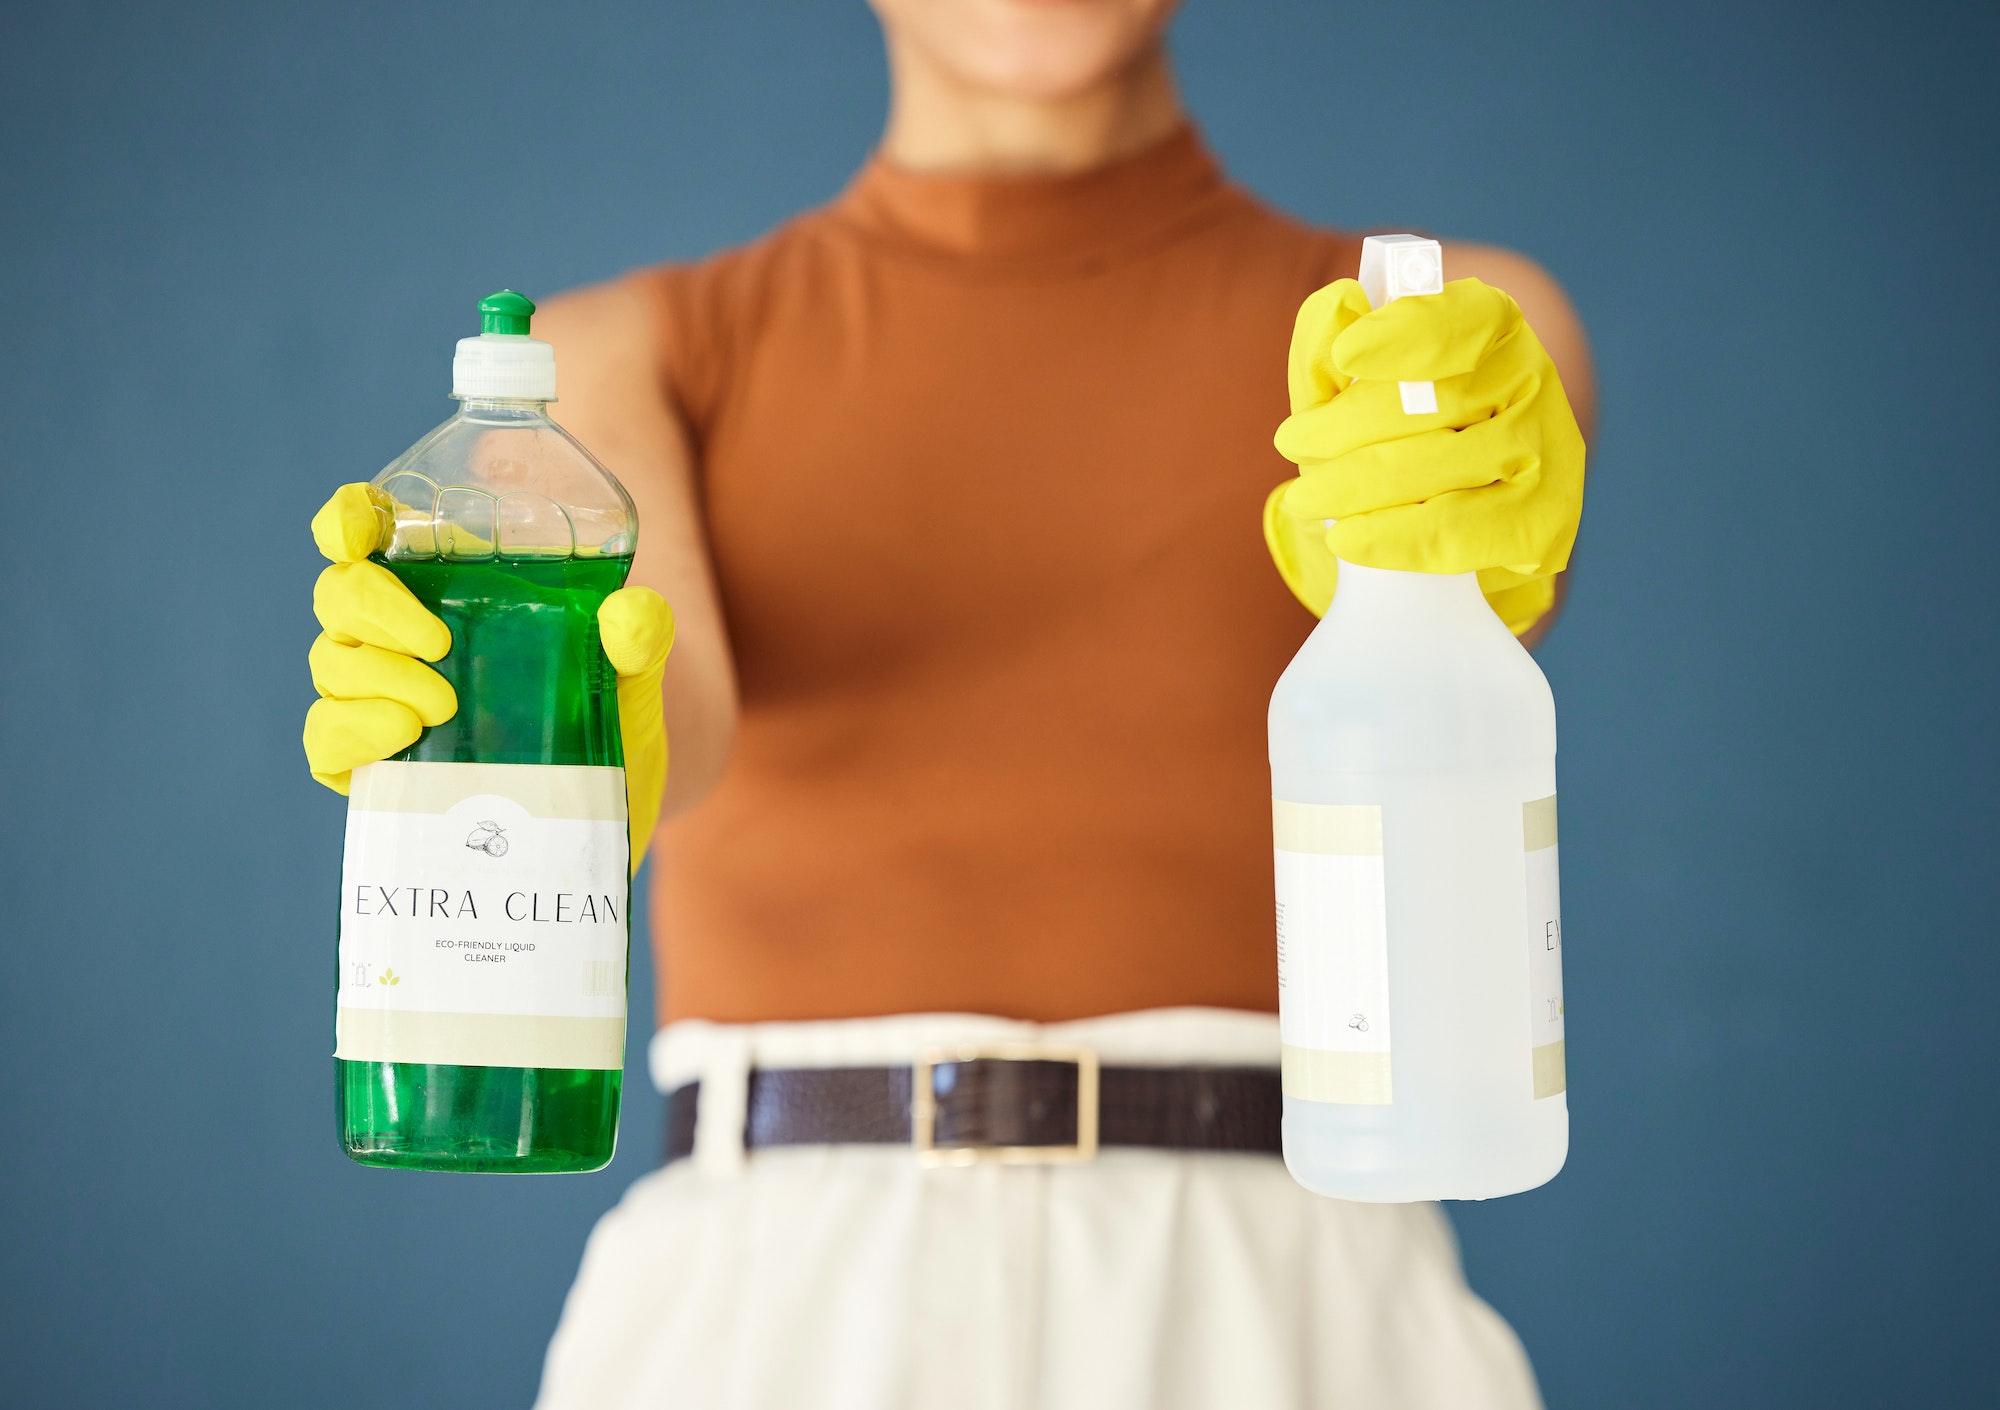 Product for cleaning, home maintenance and cleaning service, chemical and soap for hygiene mockup.